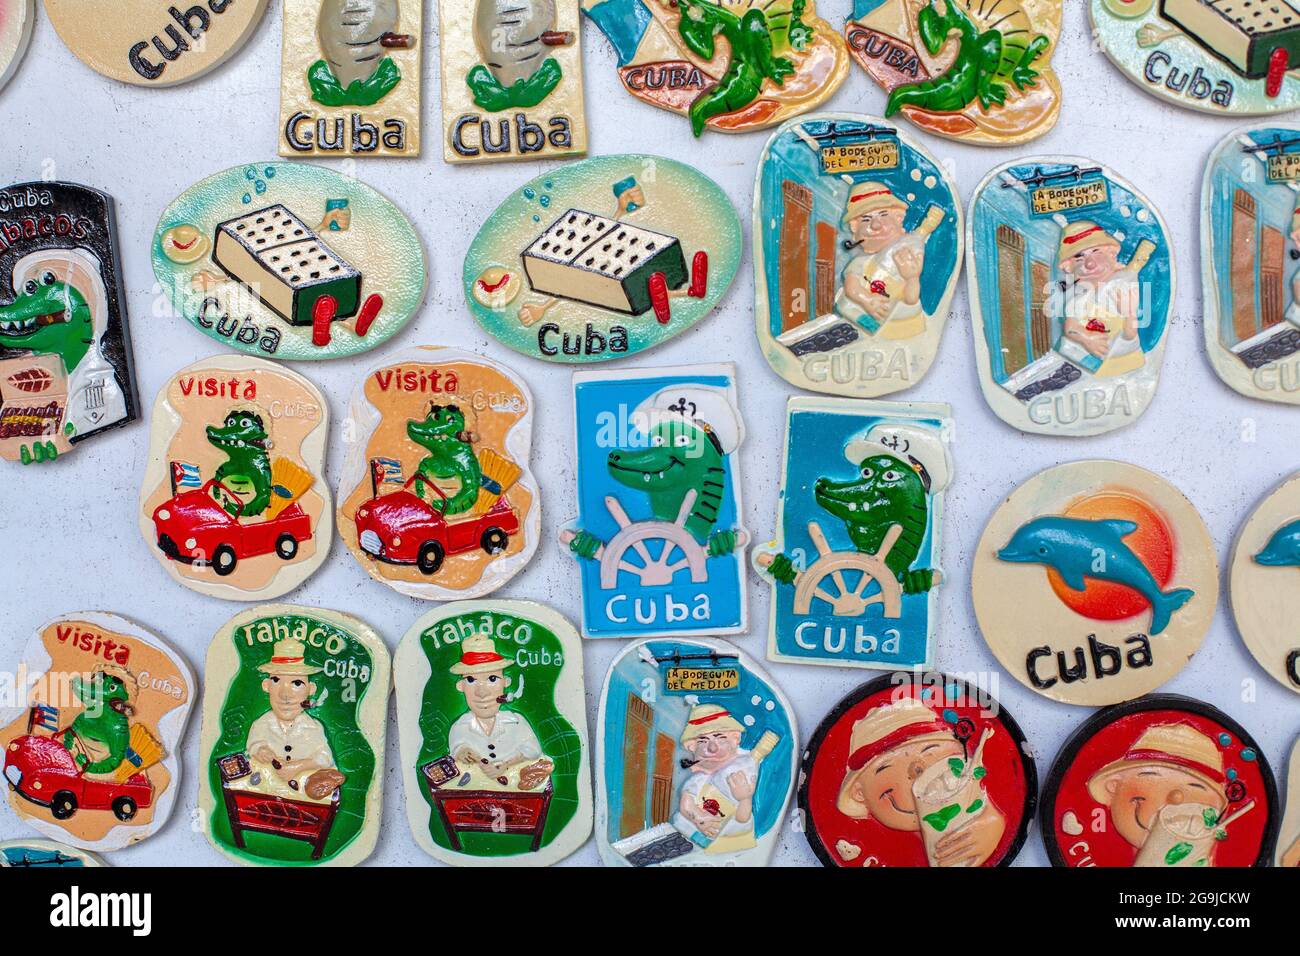 Hand Made Cuban Fridge Magnets Tourist Souvenirs For Sale In A Tourist Market In Varadero Cuba Stock Photo